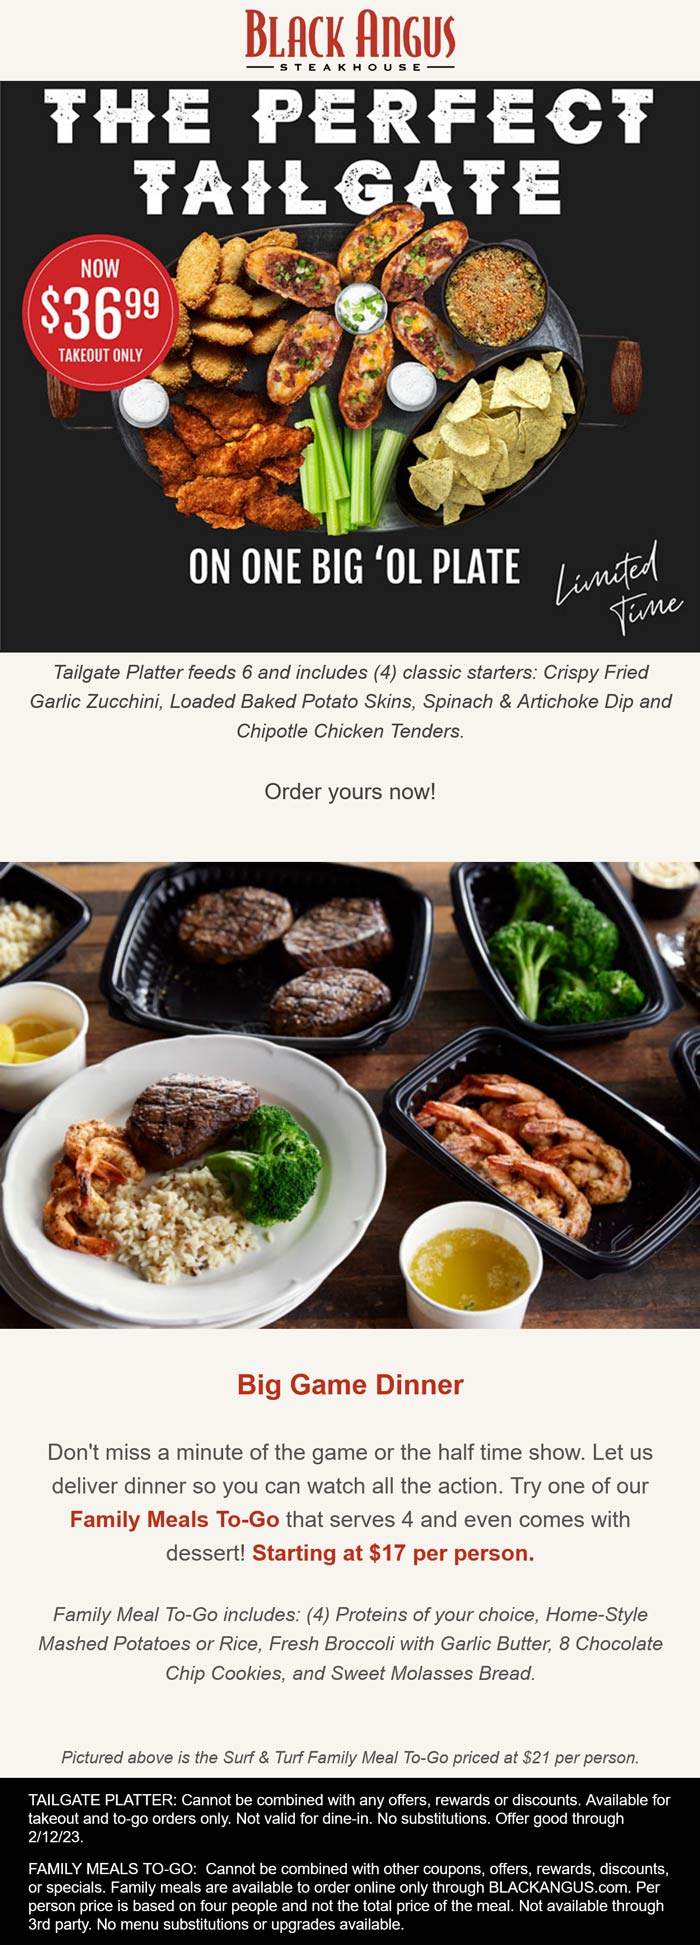 Black Angus restaurants Coupon  6 person takeout tailgate platter for $37 today at Black Angus steakhouse restaurants #blackangus 